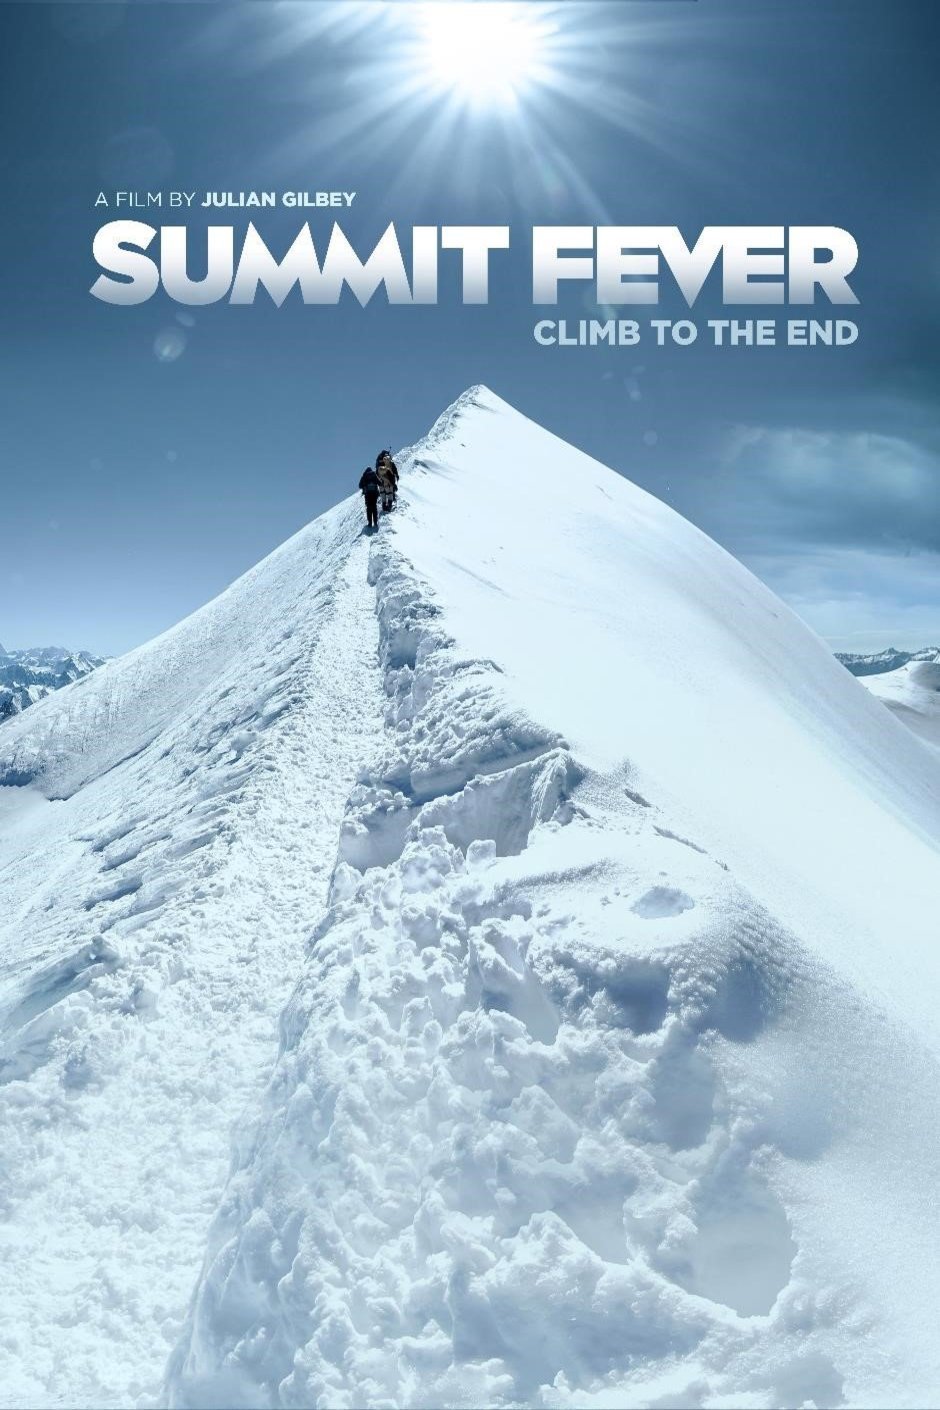 Poster of the movie Summit Fever